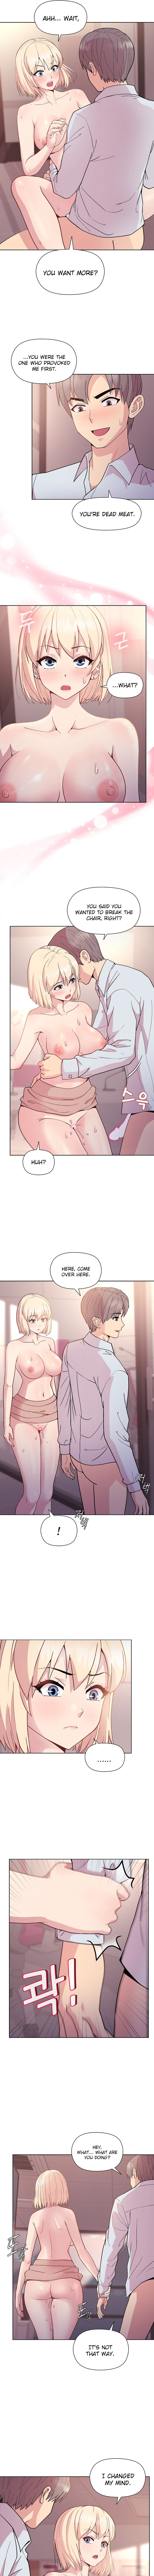 Playing a game with my Busty Manager - Chapter 10 Page 5